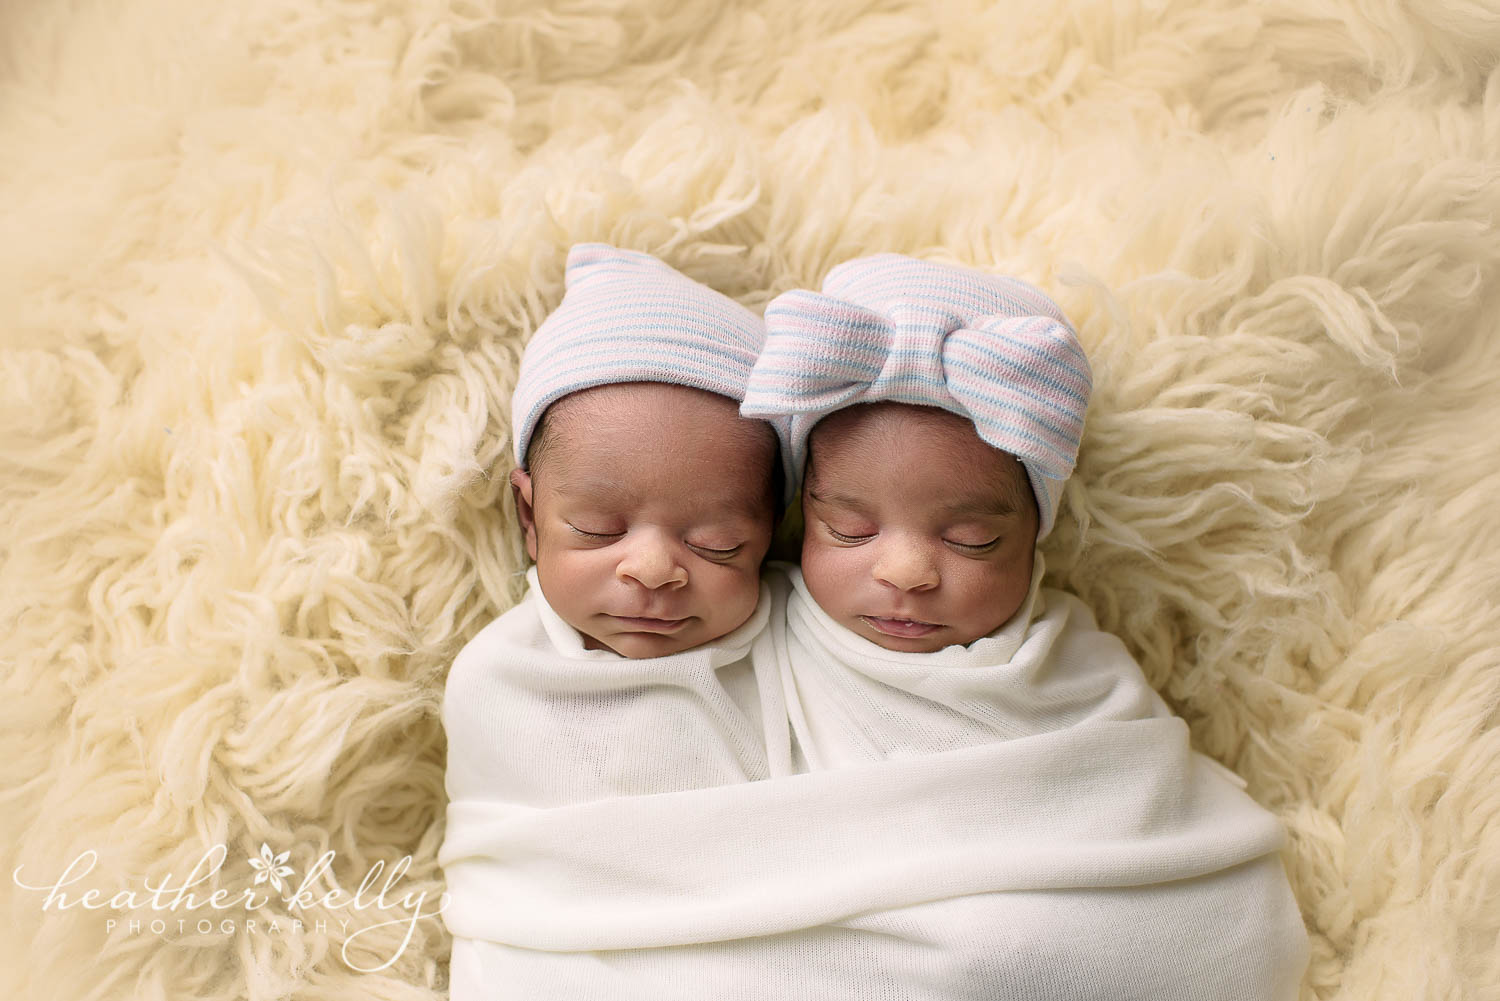 twin newborn photography east hartford. twins wearing hats from hospital